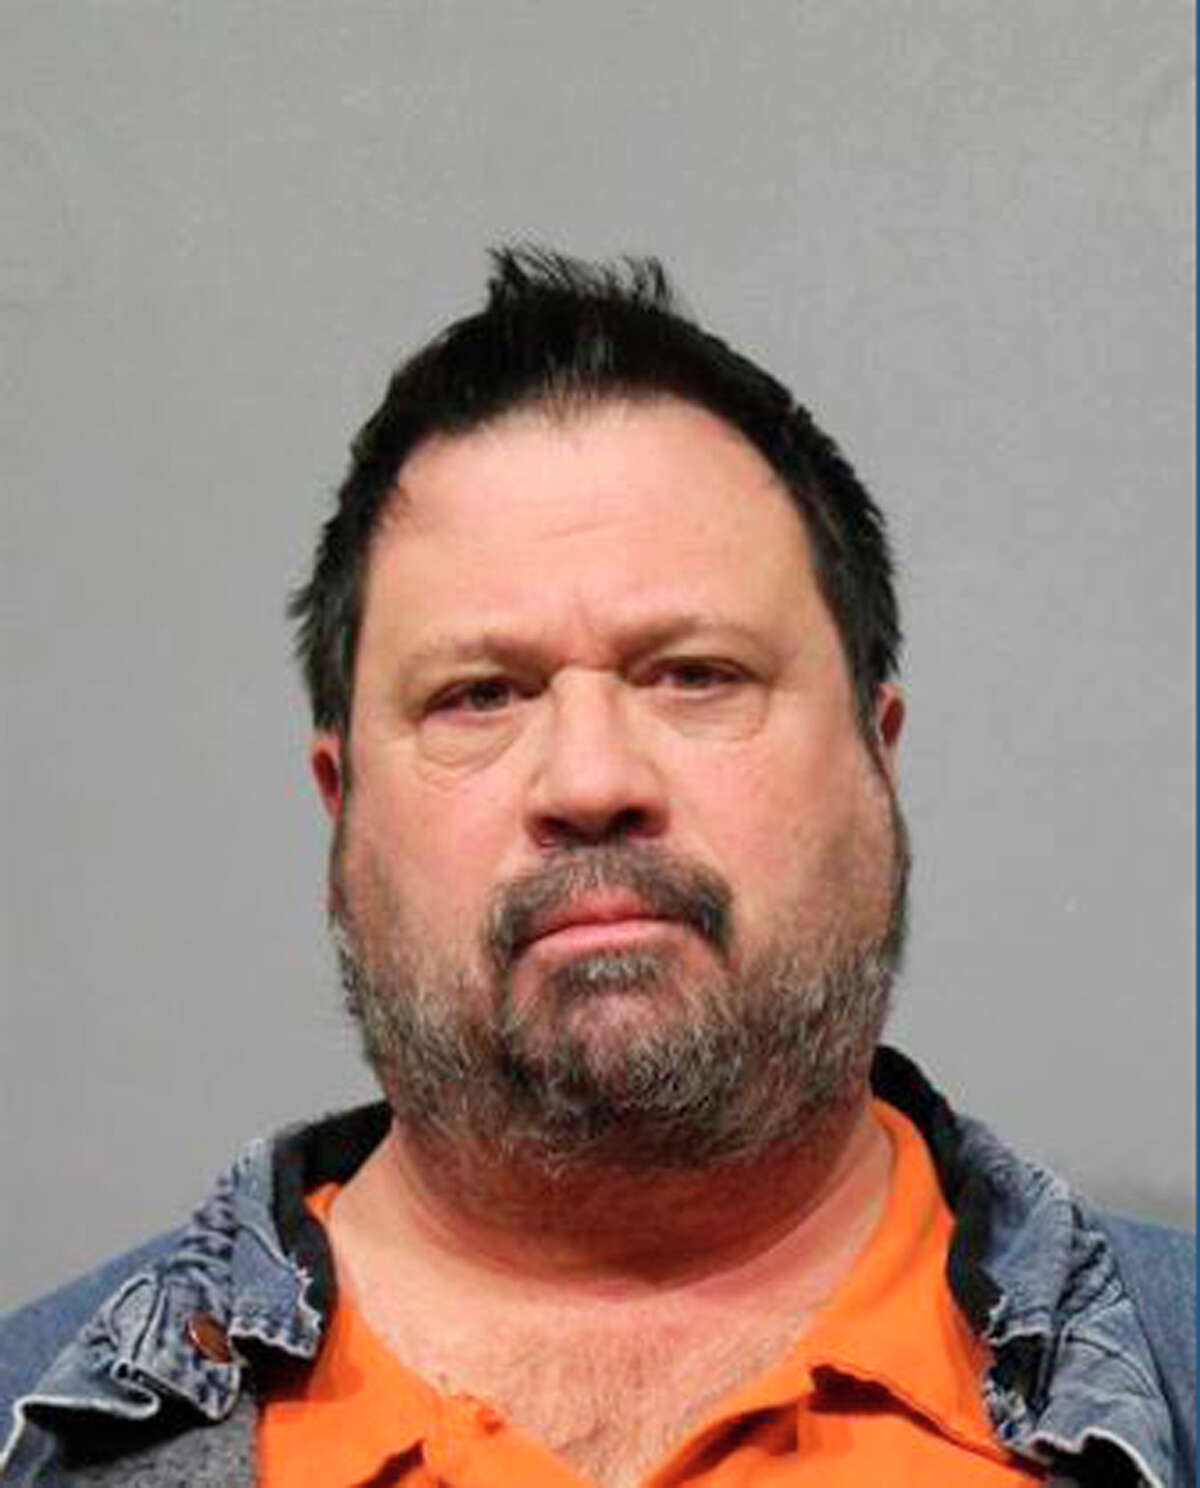 In this photo released by the Washtenaw County Jail, David Daniels, is shown in Ann Arbor, Mich. Daniels, a University of Michigan professor a world-famous opera countertenor, and his husband Scott Walters were arrested Tuesday, Jan. 29, 2019 in Ann Arbor, Mich., on allegations that he and his husband in 2010 sexually assaulted a singer in Houston. (AP Photo via Washtenaw County Jail)